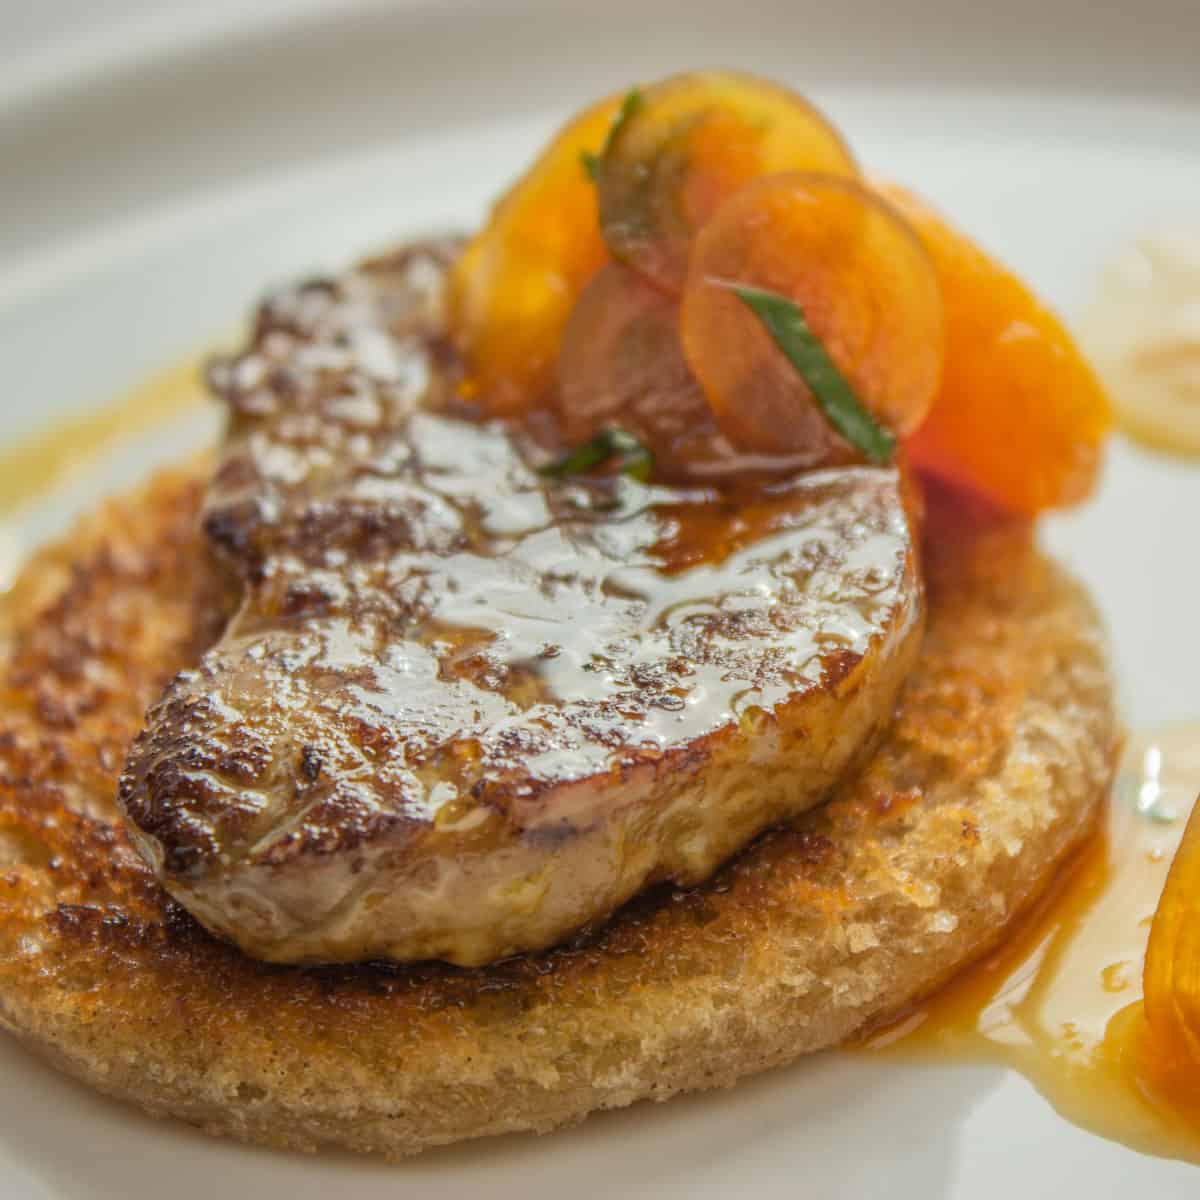 a slice of seared foie gras on toast with fruit sauce